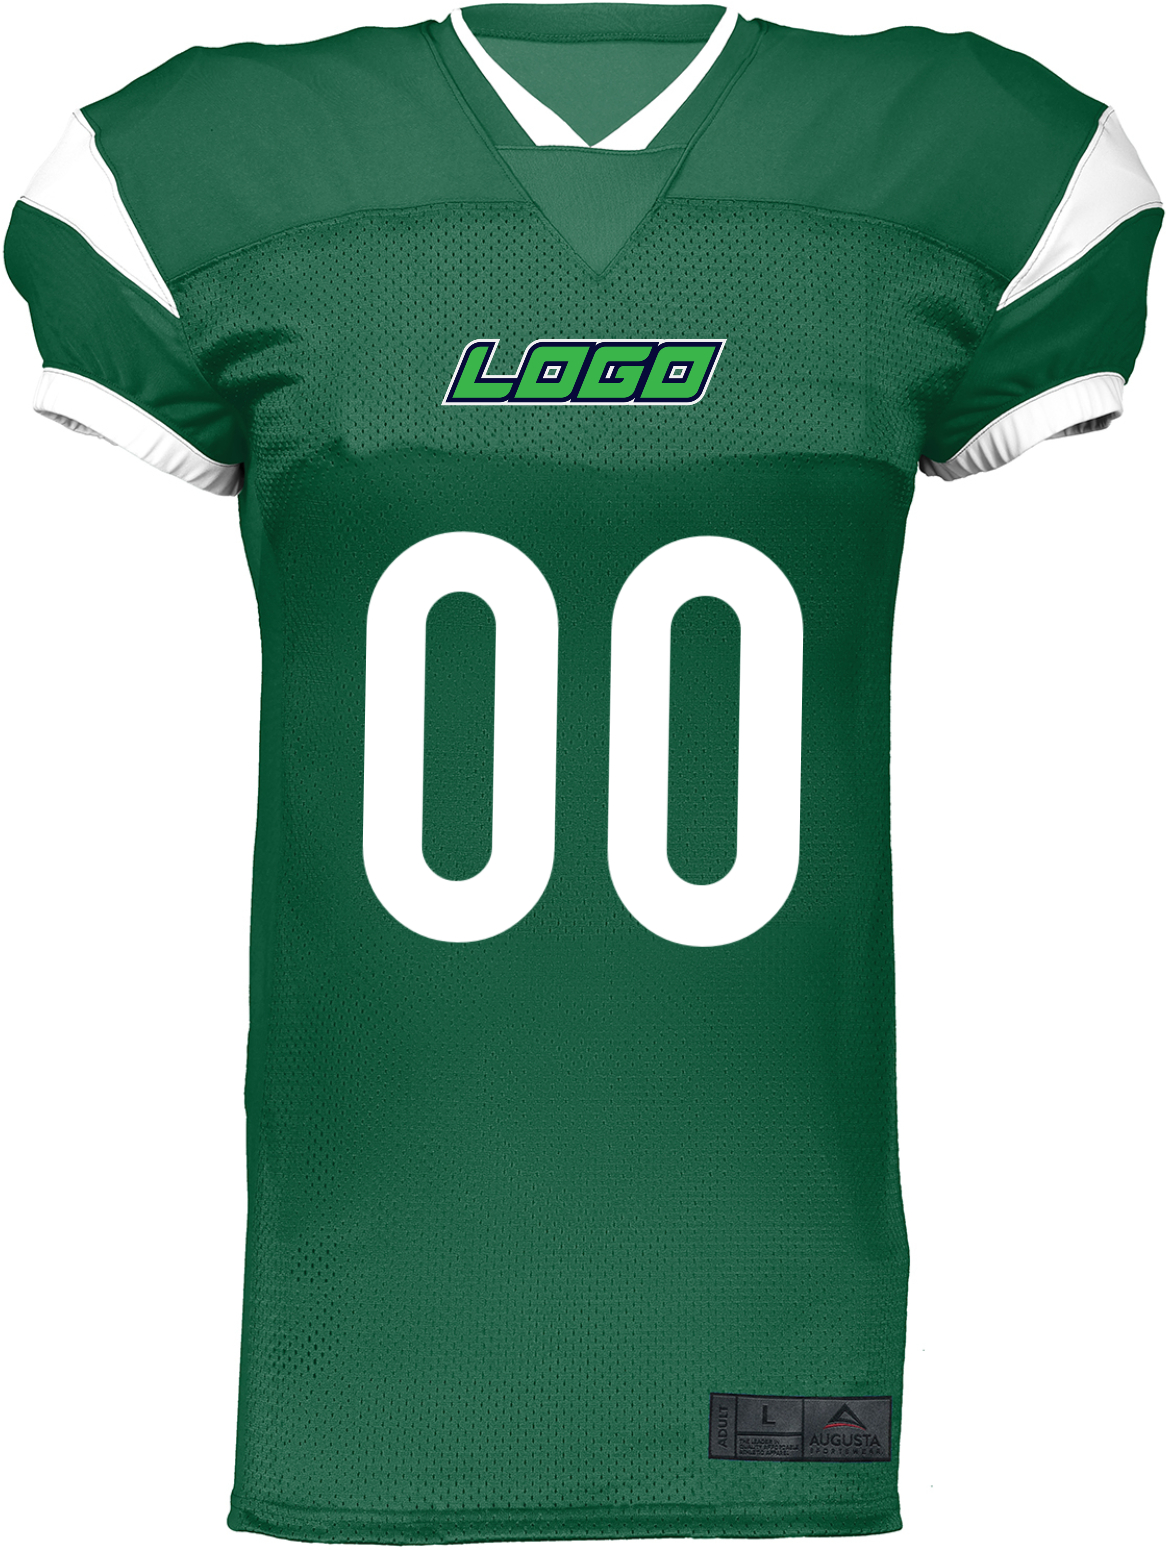 Performance Youth Football Jersey